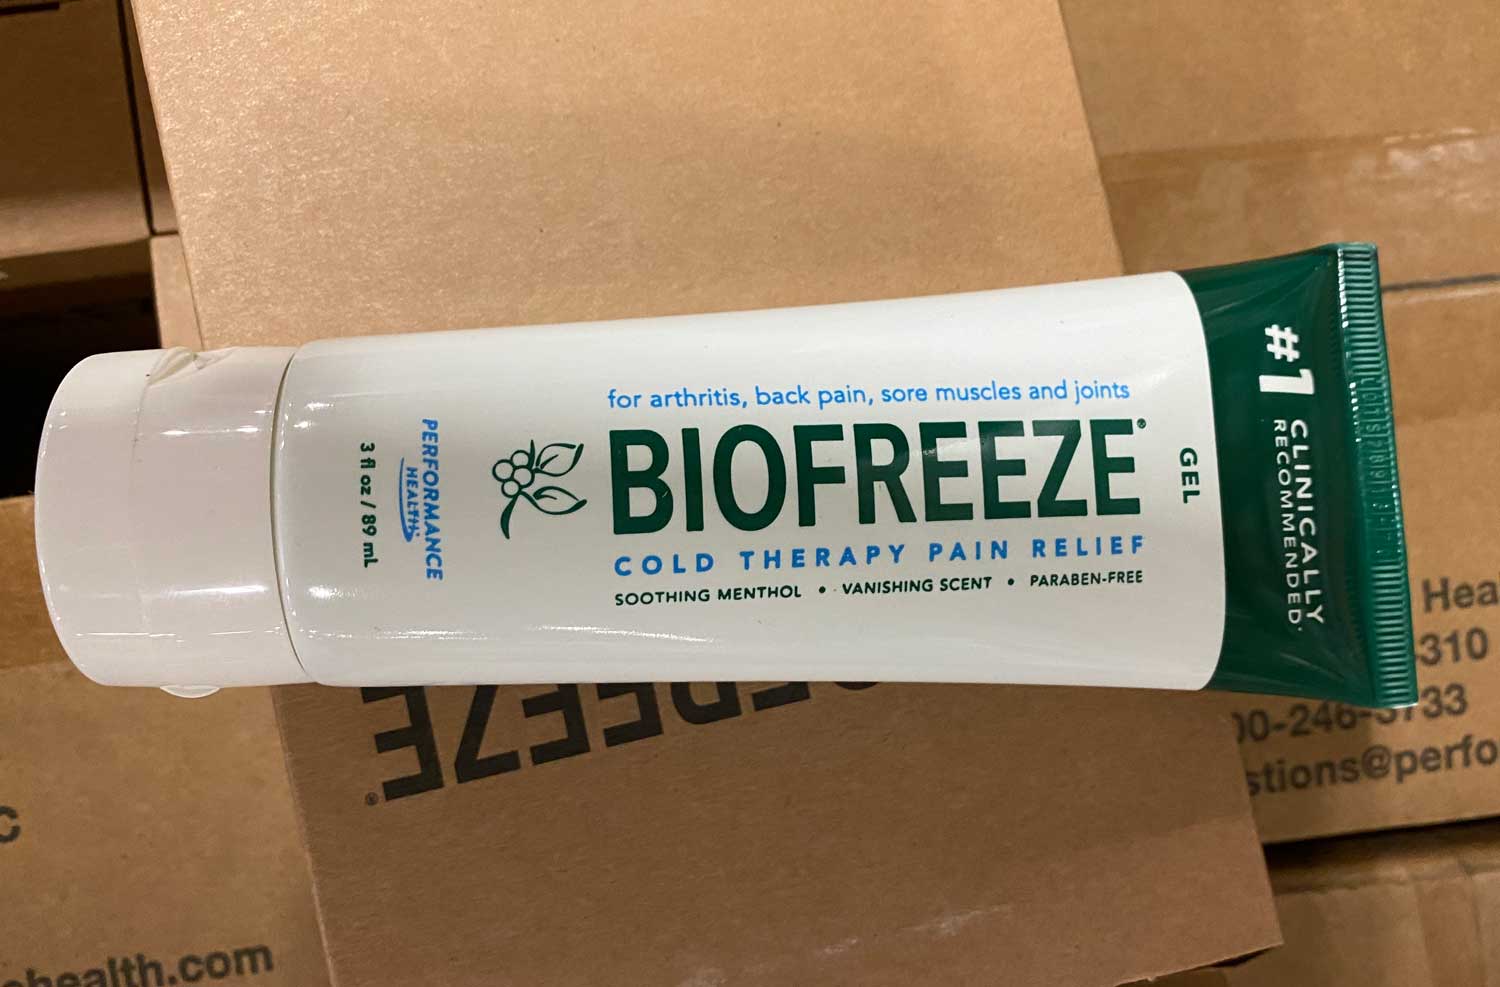 Big Florida Freeze Deepens as Guard and Reserve Hit with More Biofreeze!